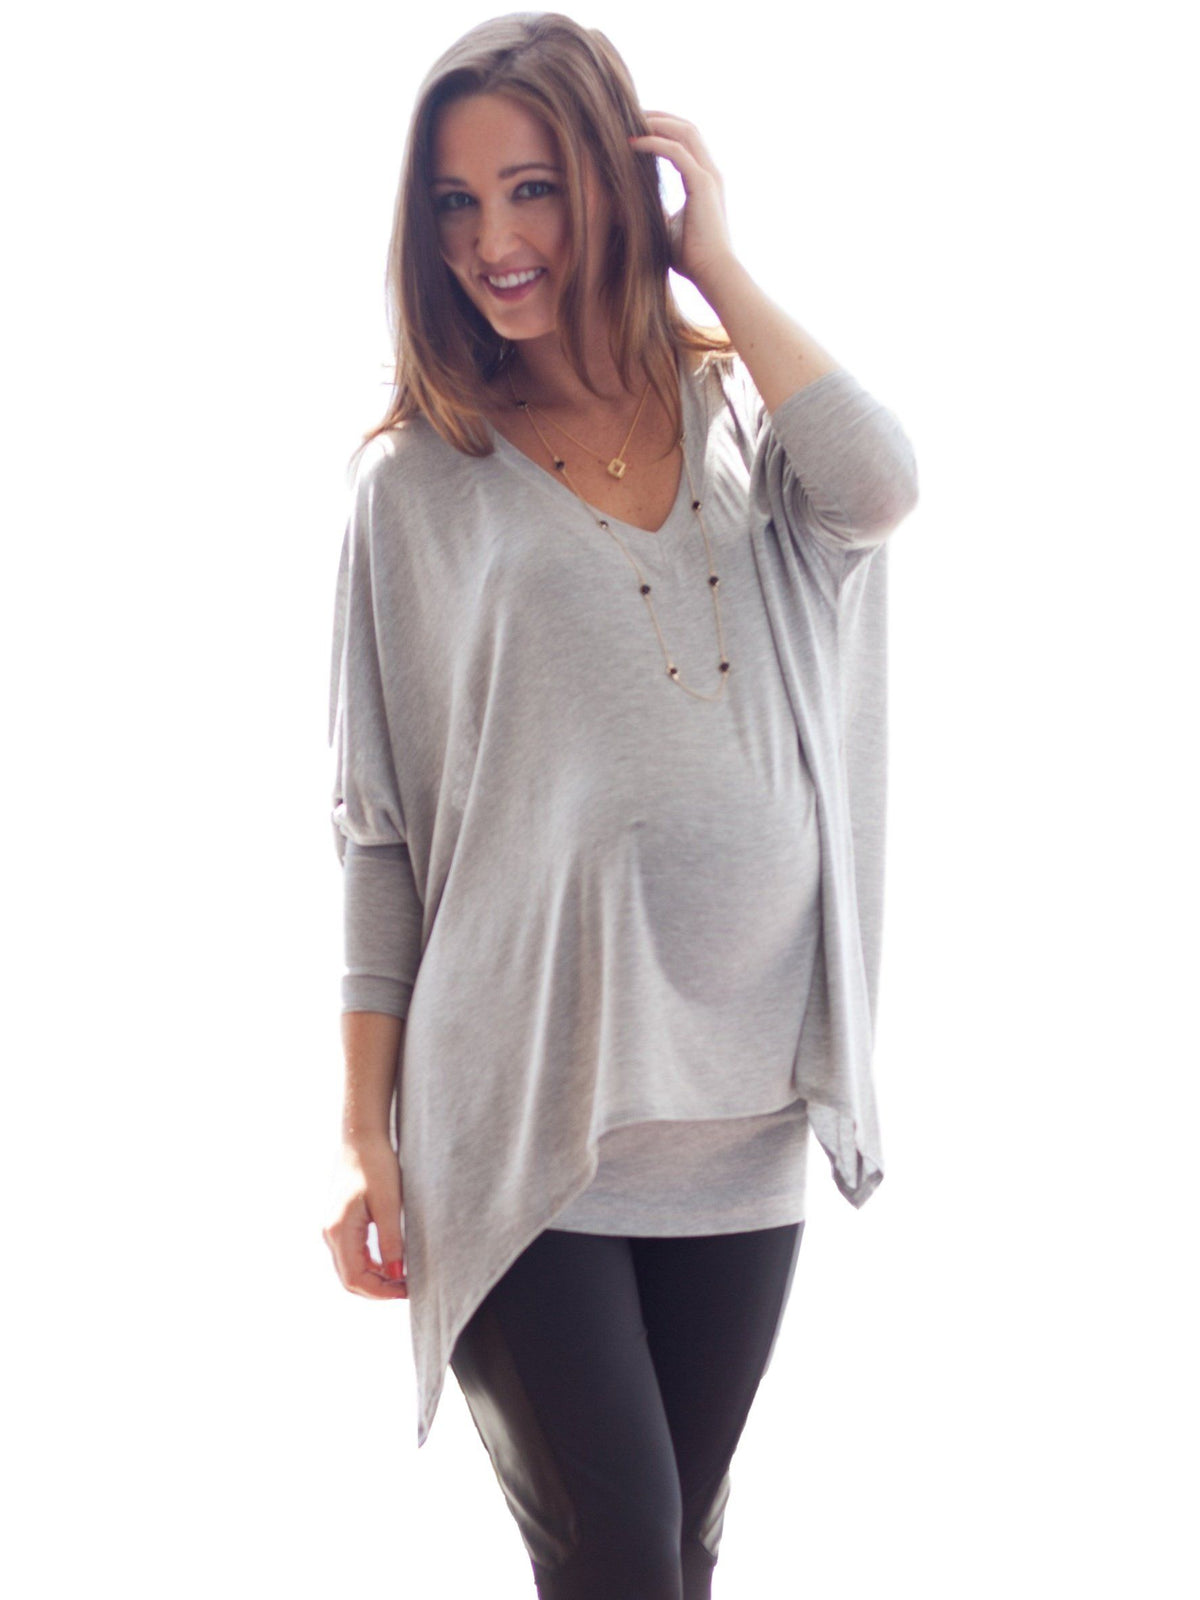 Jil 2 Piece Top Top by alex & harry for maternity, nursing and forever, not maternity 